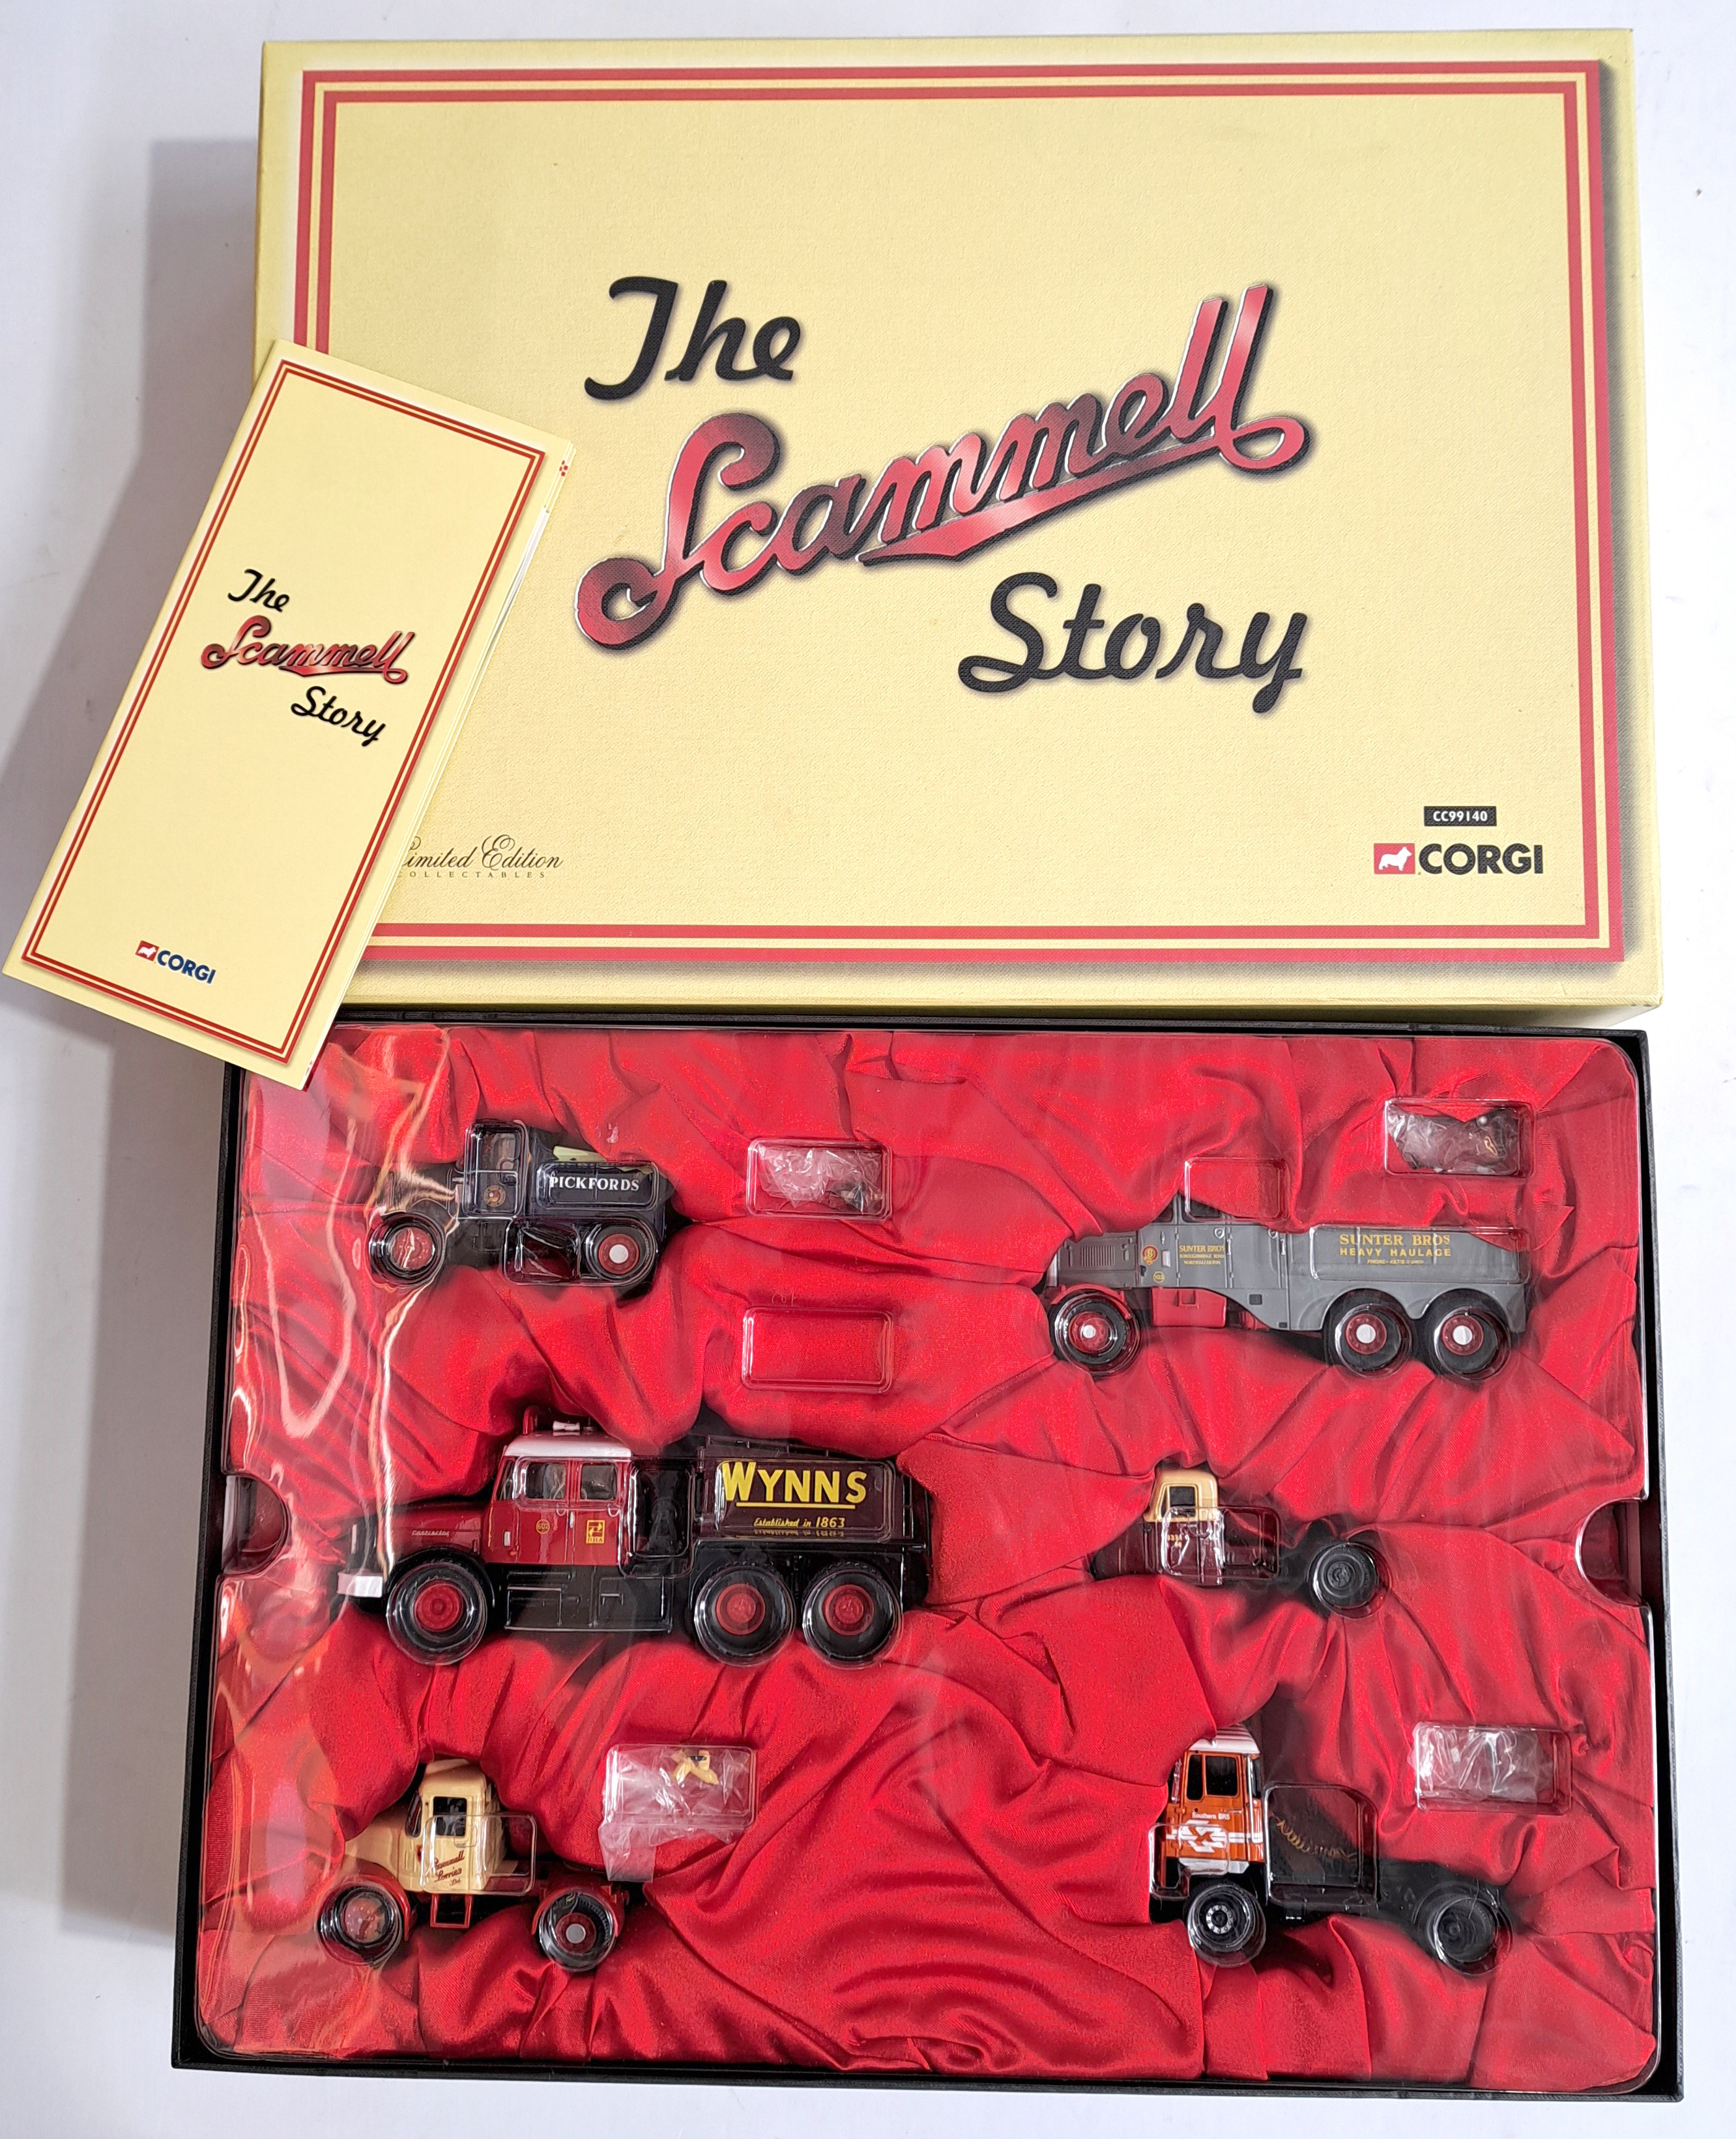 Corgi a boxed CC99140 Set "The Scammell Story" - Image 2 of 3